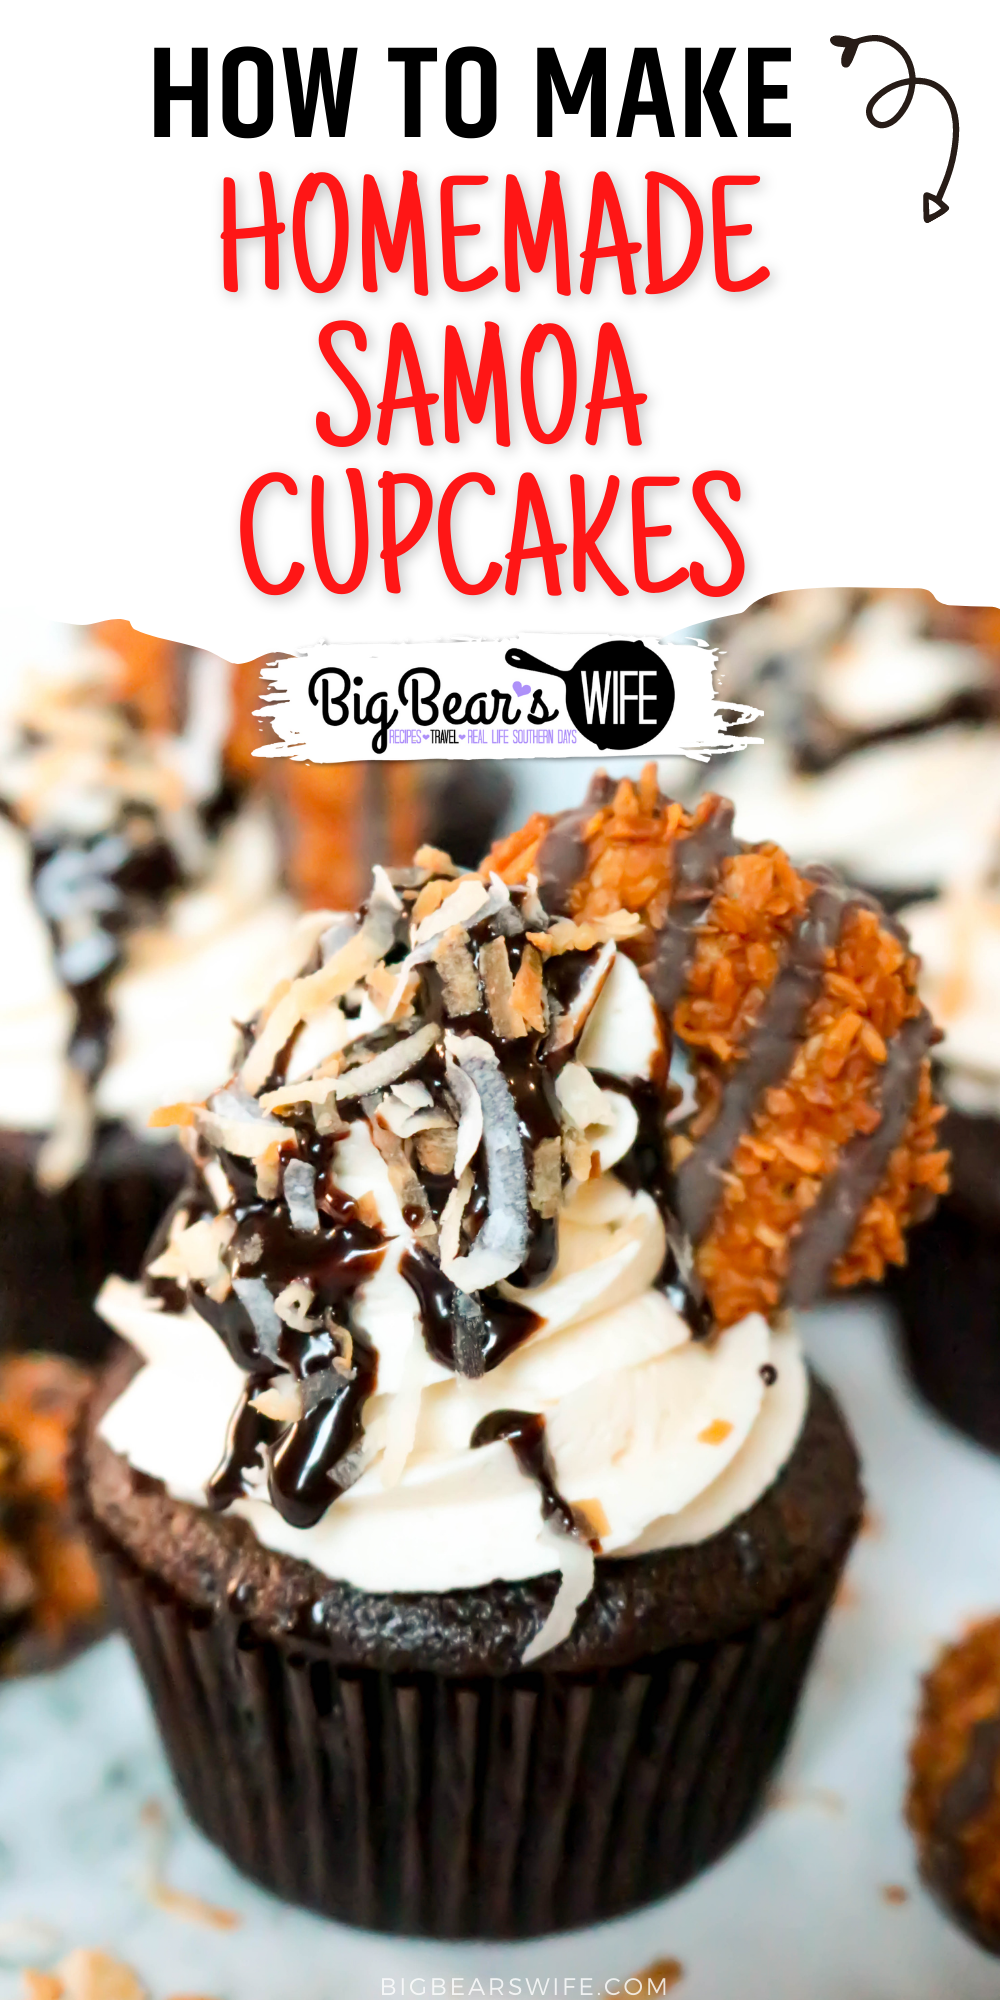 Turn your favorite Samoa cookie Girl Scout cookies into a homemade treat with these Samoa Cupcakes! These chocolate cupcakes have a caramel frosting and are topped with chocolate, toasted coconut and Samoa Cookies! 

 via @bigbearswife